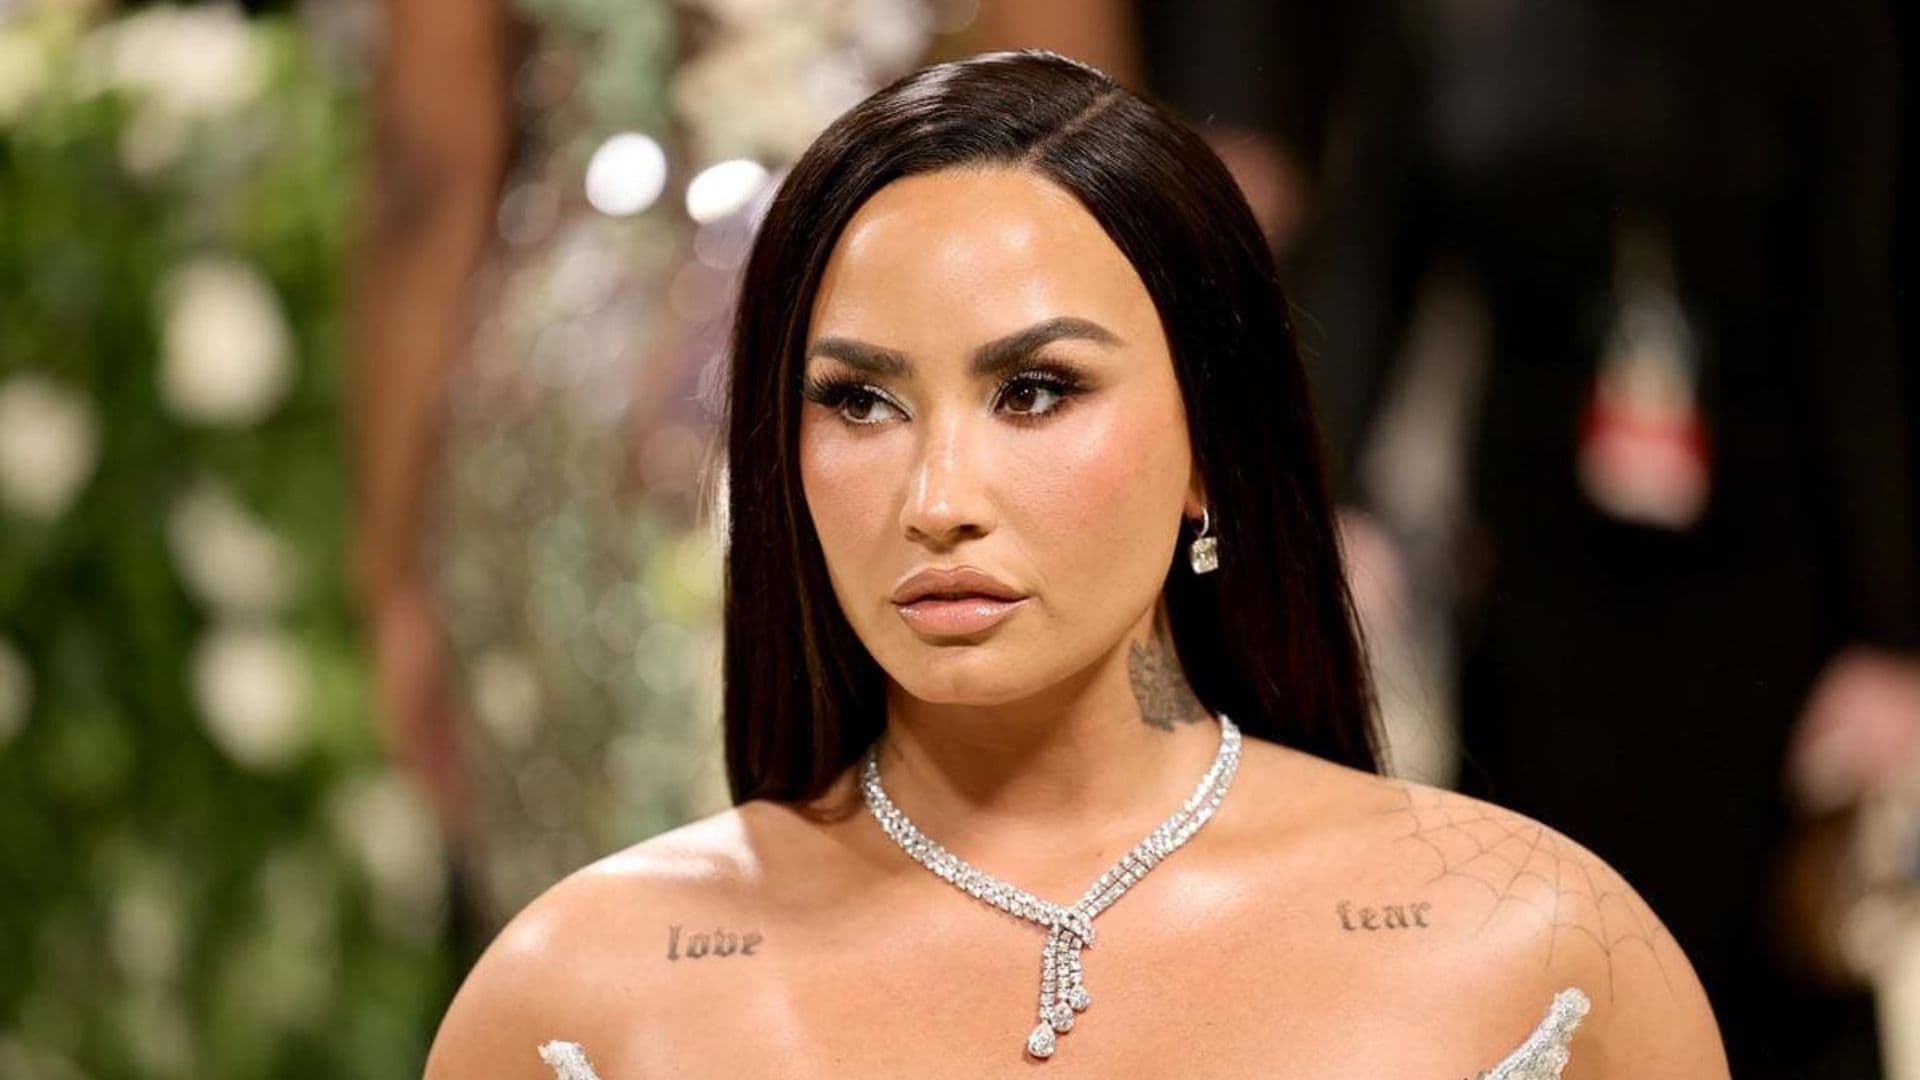 Demi Lovato ‘felt defeated’ every time she had to ‘walk back into a treatment center’